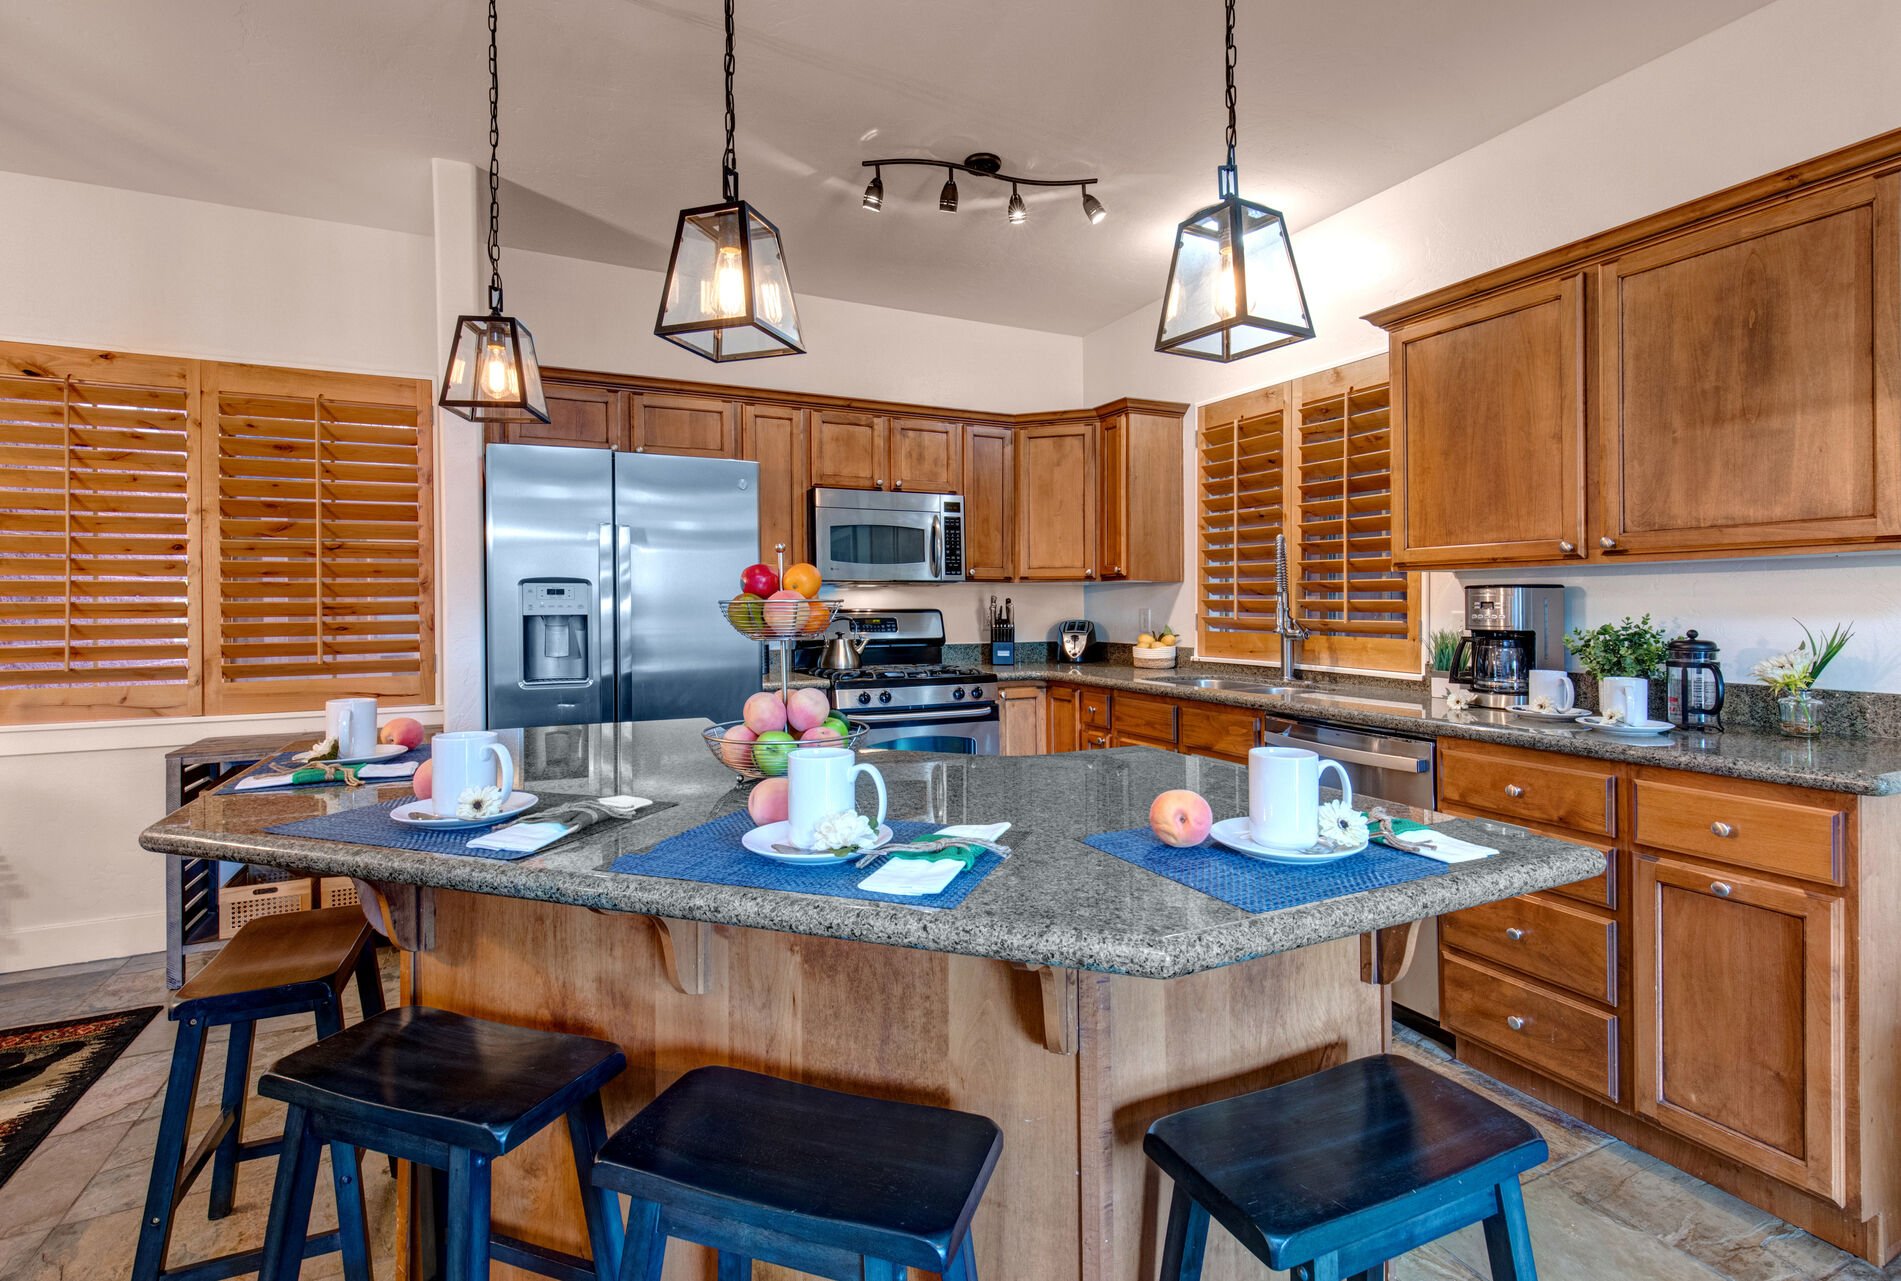 Fully Equipped Kitchen with beautiful stone countertops, stainless steel appliances, ice maker, and island seating for four